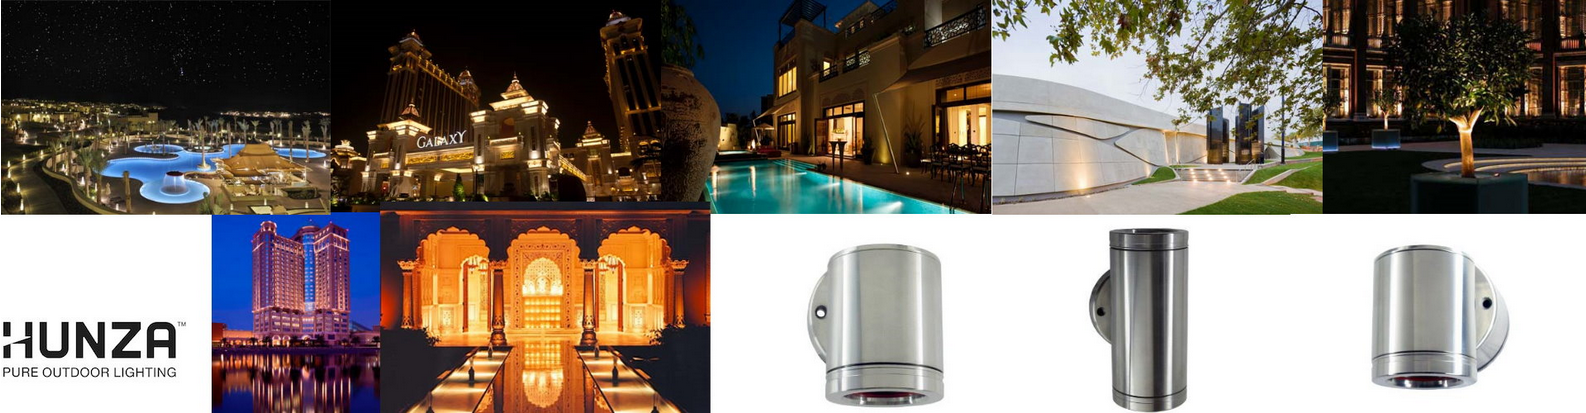 HUNZA - High Quality Outdoor & Landscape Lighting Products